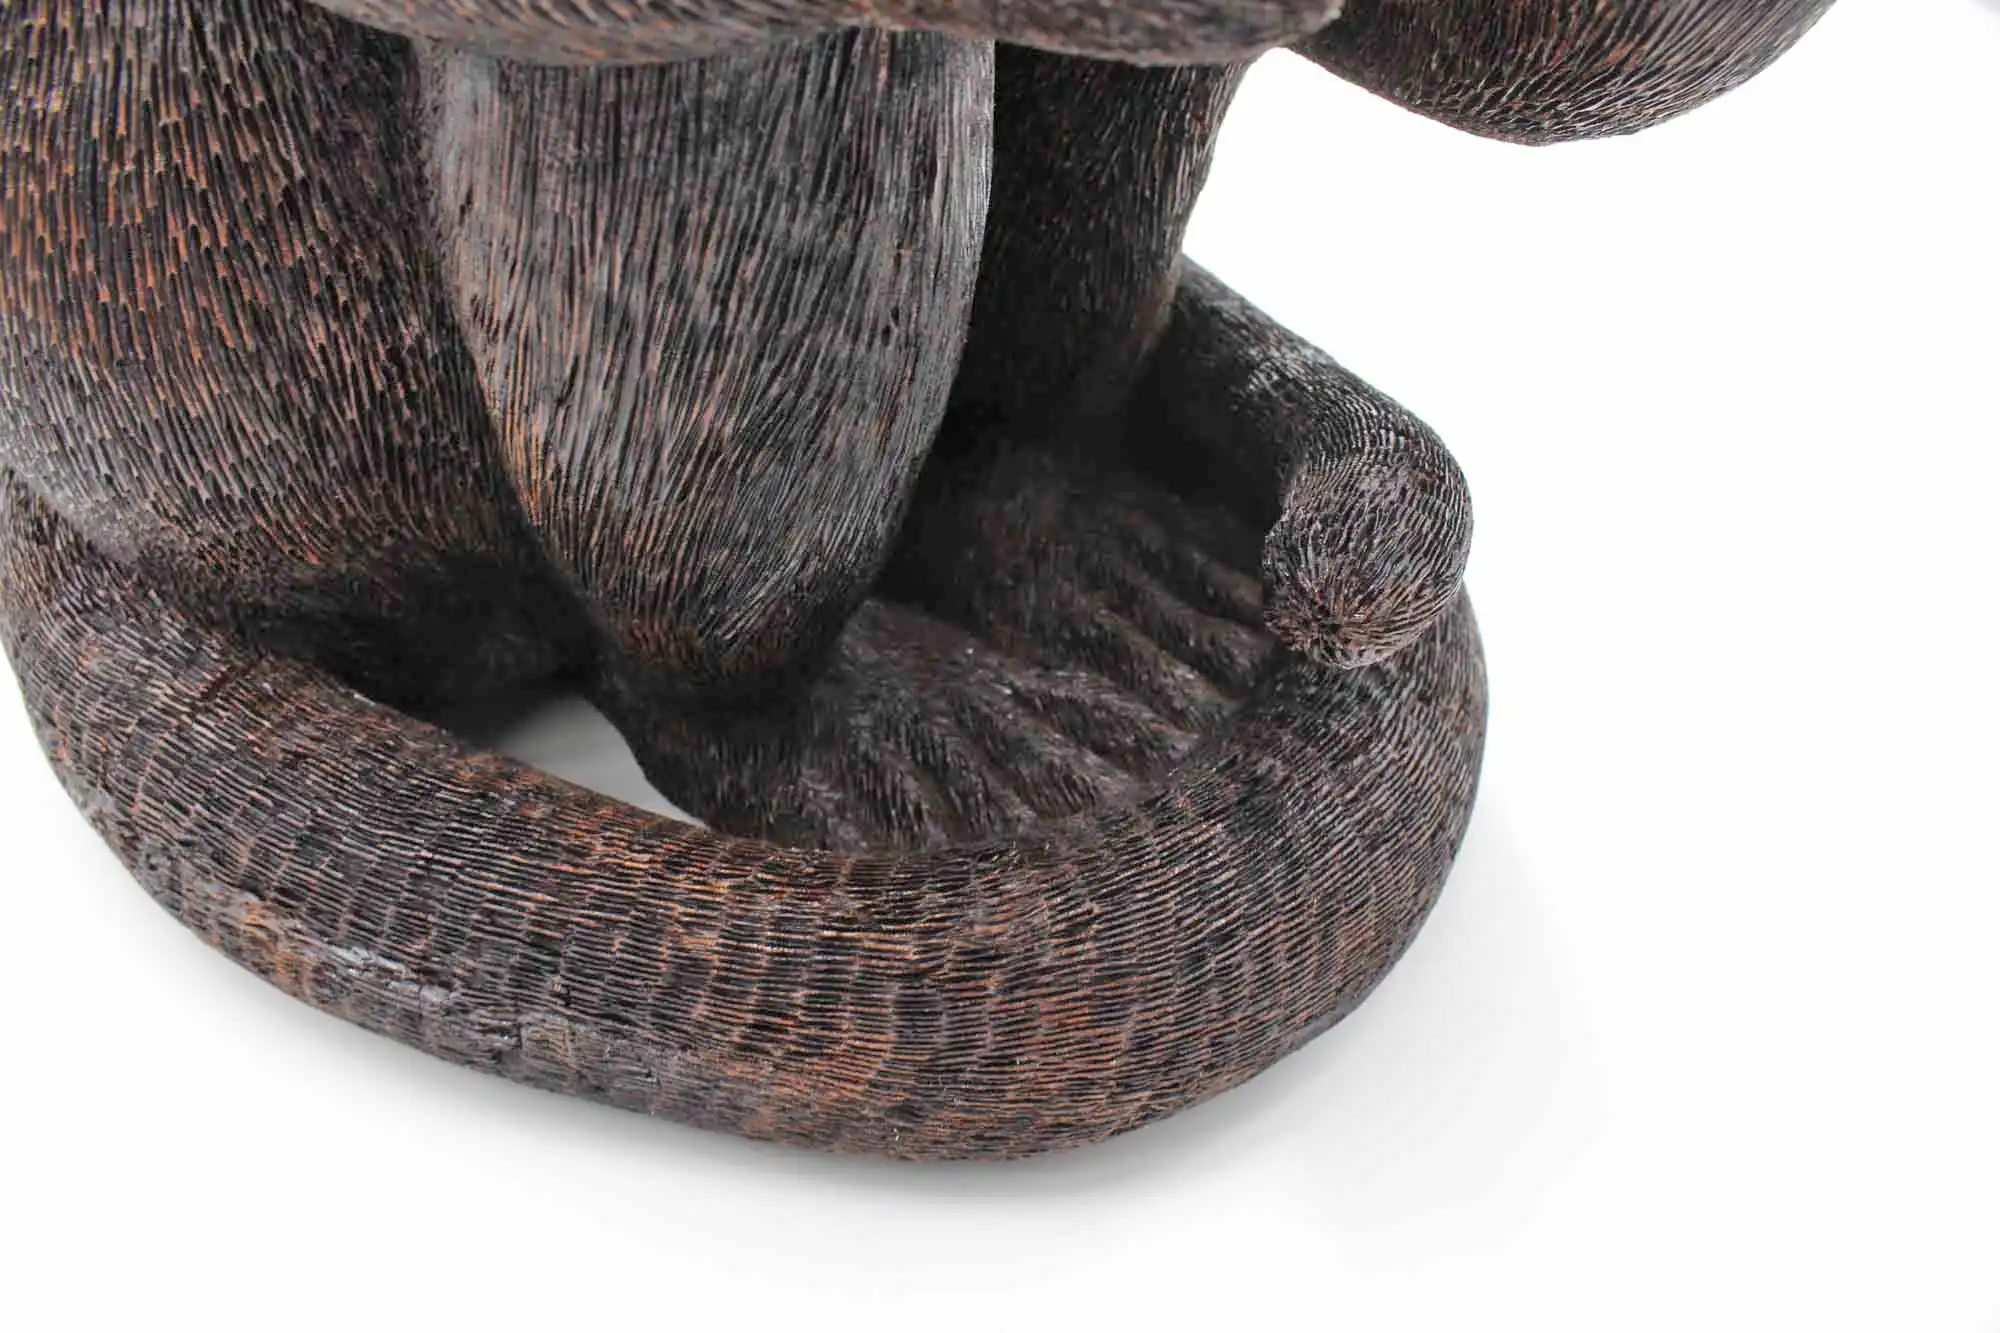 Monkey woodcarving sculpture